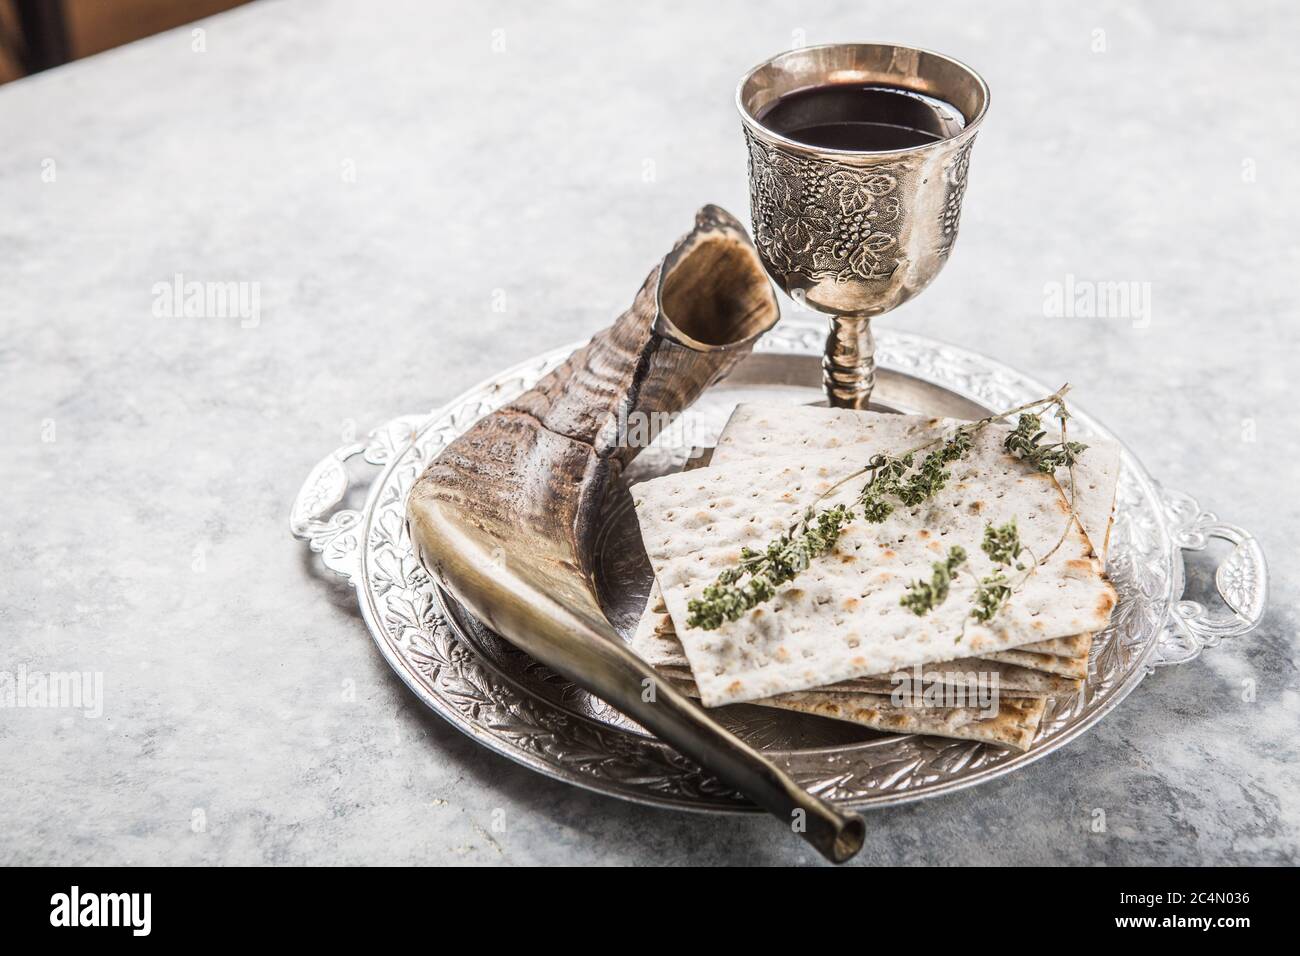 Metal plate with matzah or matza, Kiddush Cup, Shofar horn on a light background presented as a Passover seder feast or meal with copy space. Jewish Stock Photo - Alamy